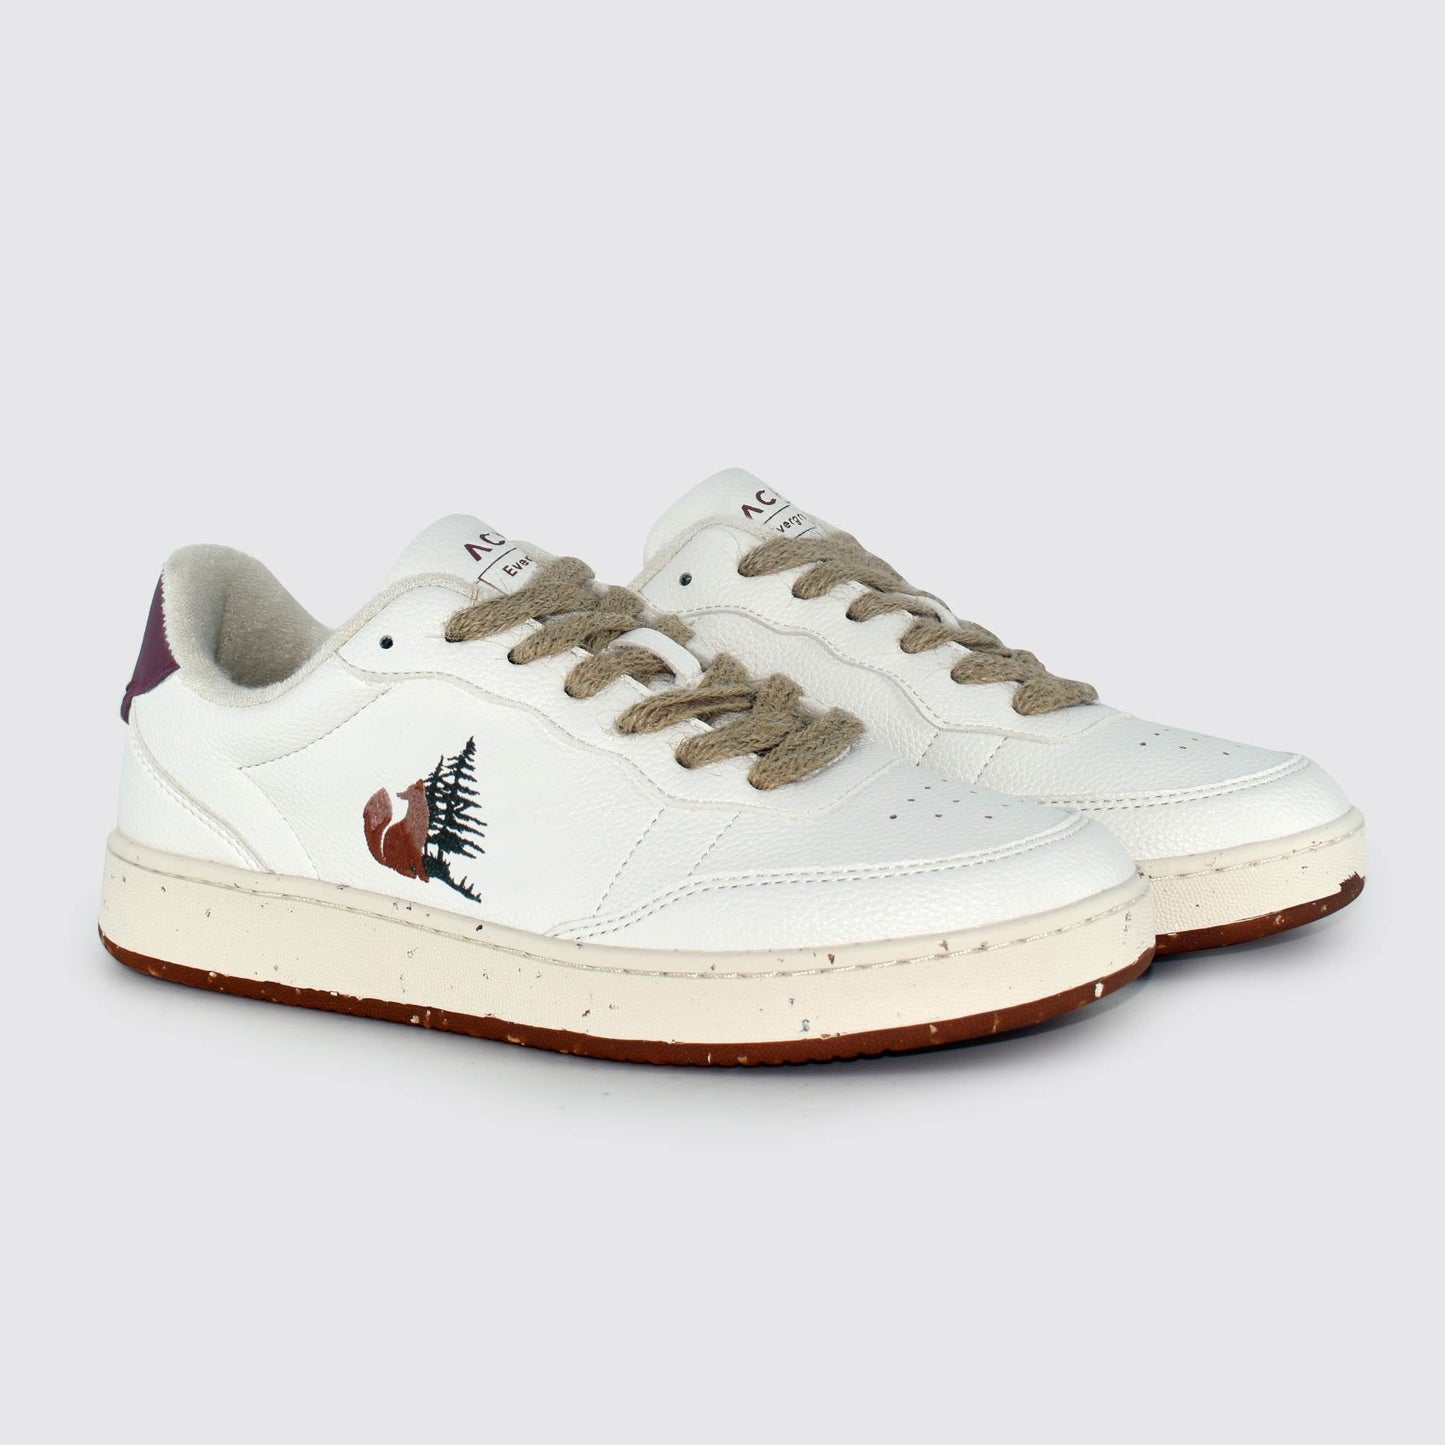 New - Evergreen White Fox Shoes